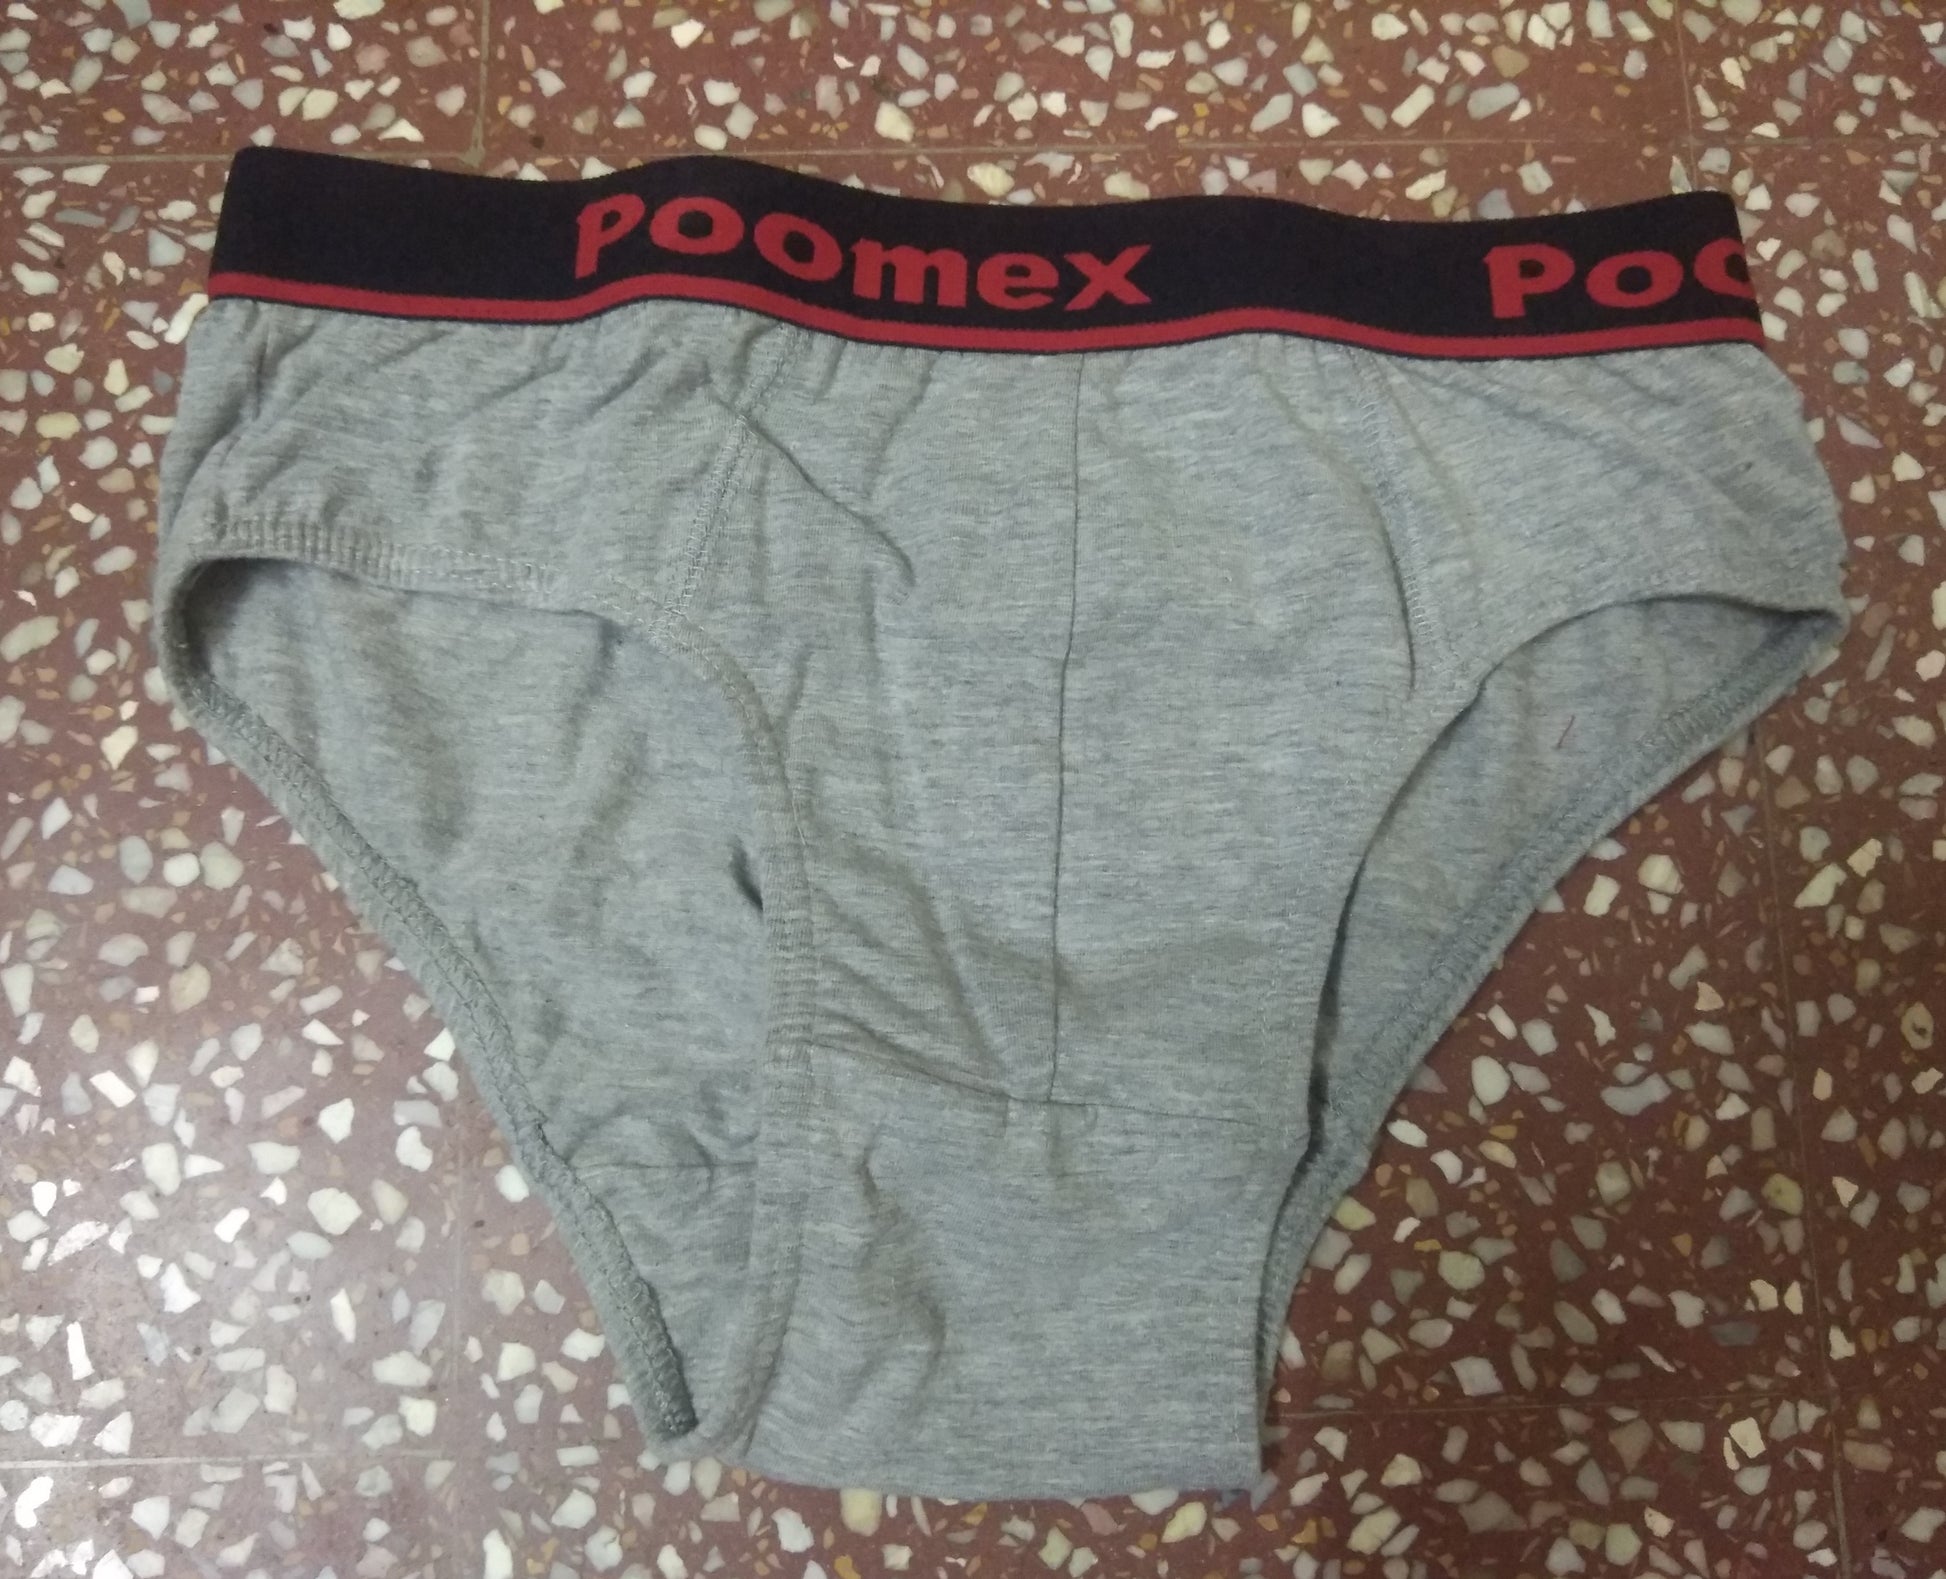 Gents Poomex Elegant Brief - High-Quality 100% Cotton. Invisible Wear. Fast  Shipping. COD & Refund Available.